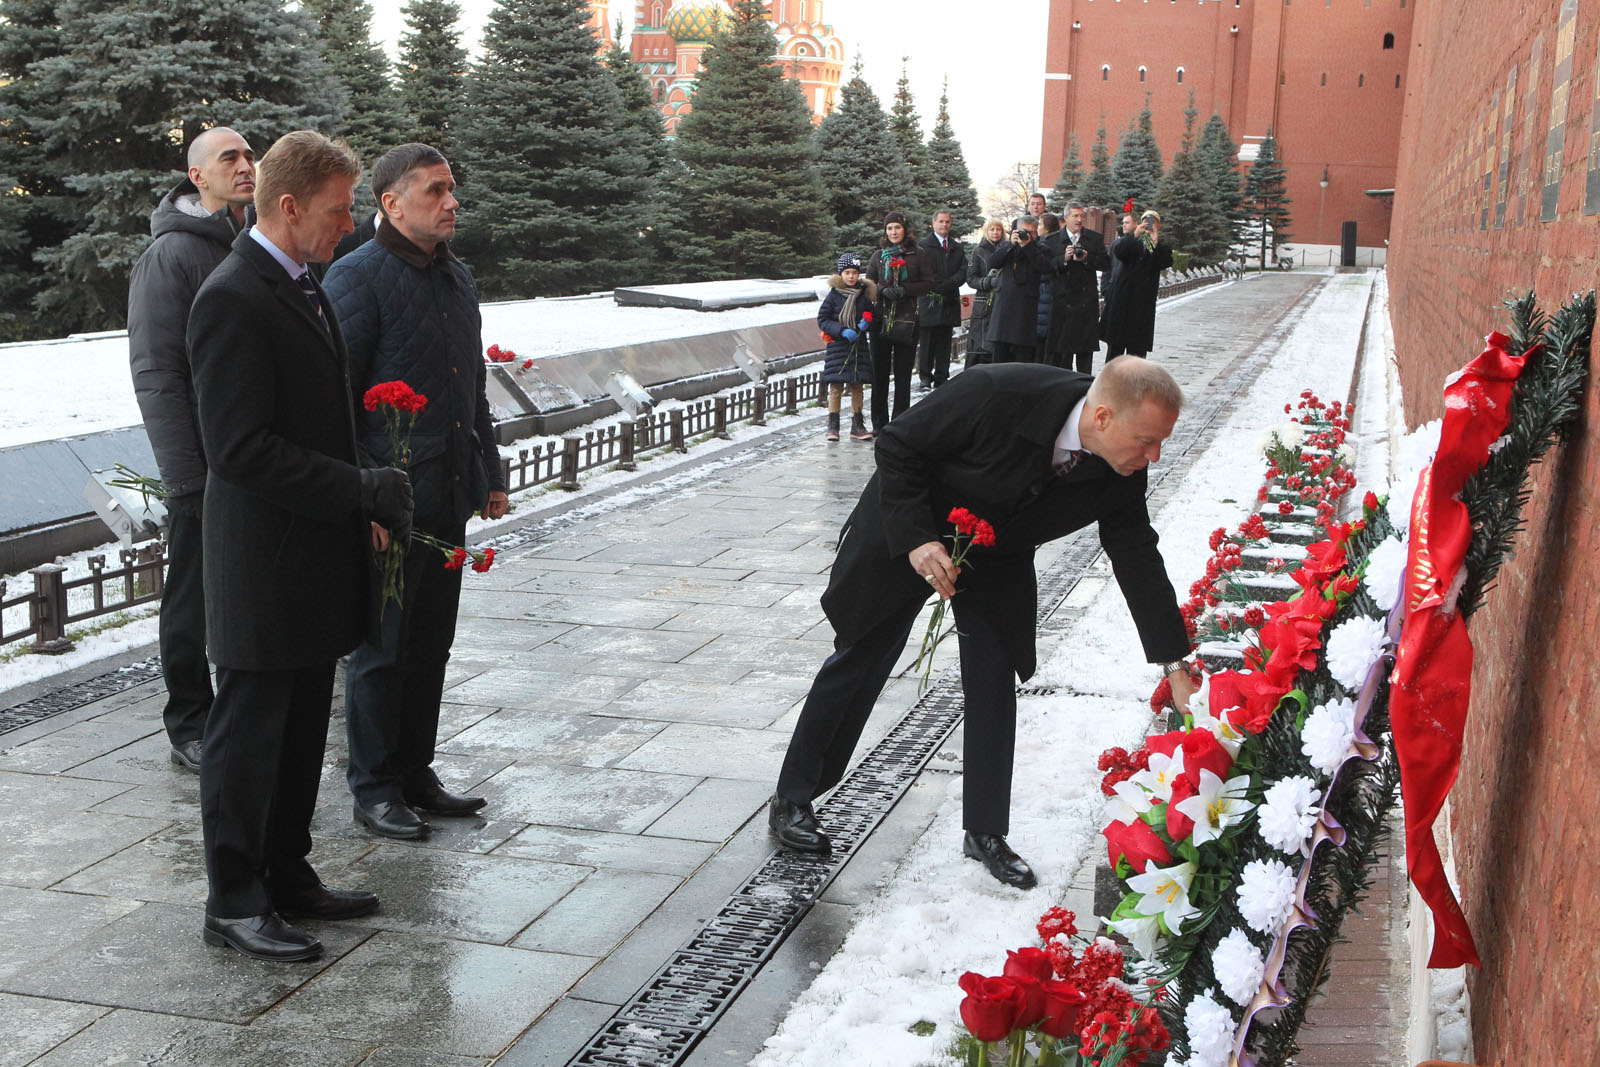 At the Kremlin Wall in Red Square in Moscow, Expedition 46-47 crewmember Tim Kopra of NASA lays flowers at the site where Russian space icons are interred in a ceremony Nov. 23. Looking on from left to right are backup crewmember Anatoly Ivanishin of the Russian Federal Space Agency (Roscosmos) and prime crewmembers Tim Peake of the European Space Agency and Yuri Malenchenko of Roscosmos. Peake, Malenchenko and Kopra will launch on Dec. 15 on the Soyuz TMA-19M spacecraft from the Baikonur Cosmodrome in Kazakhstan for a six-month mission on the International Space Station.
NASA/Seth Marcantel